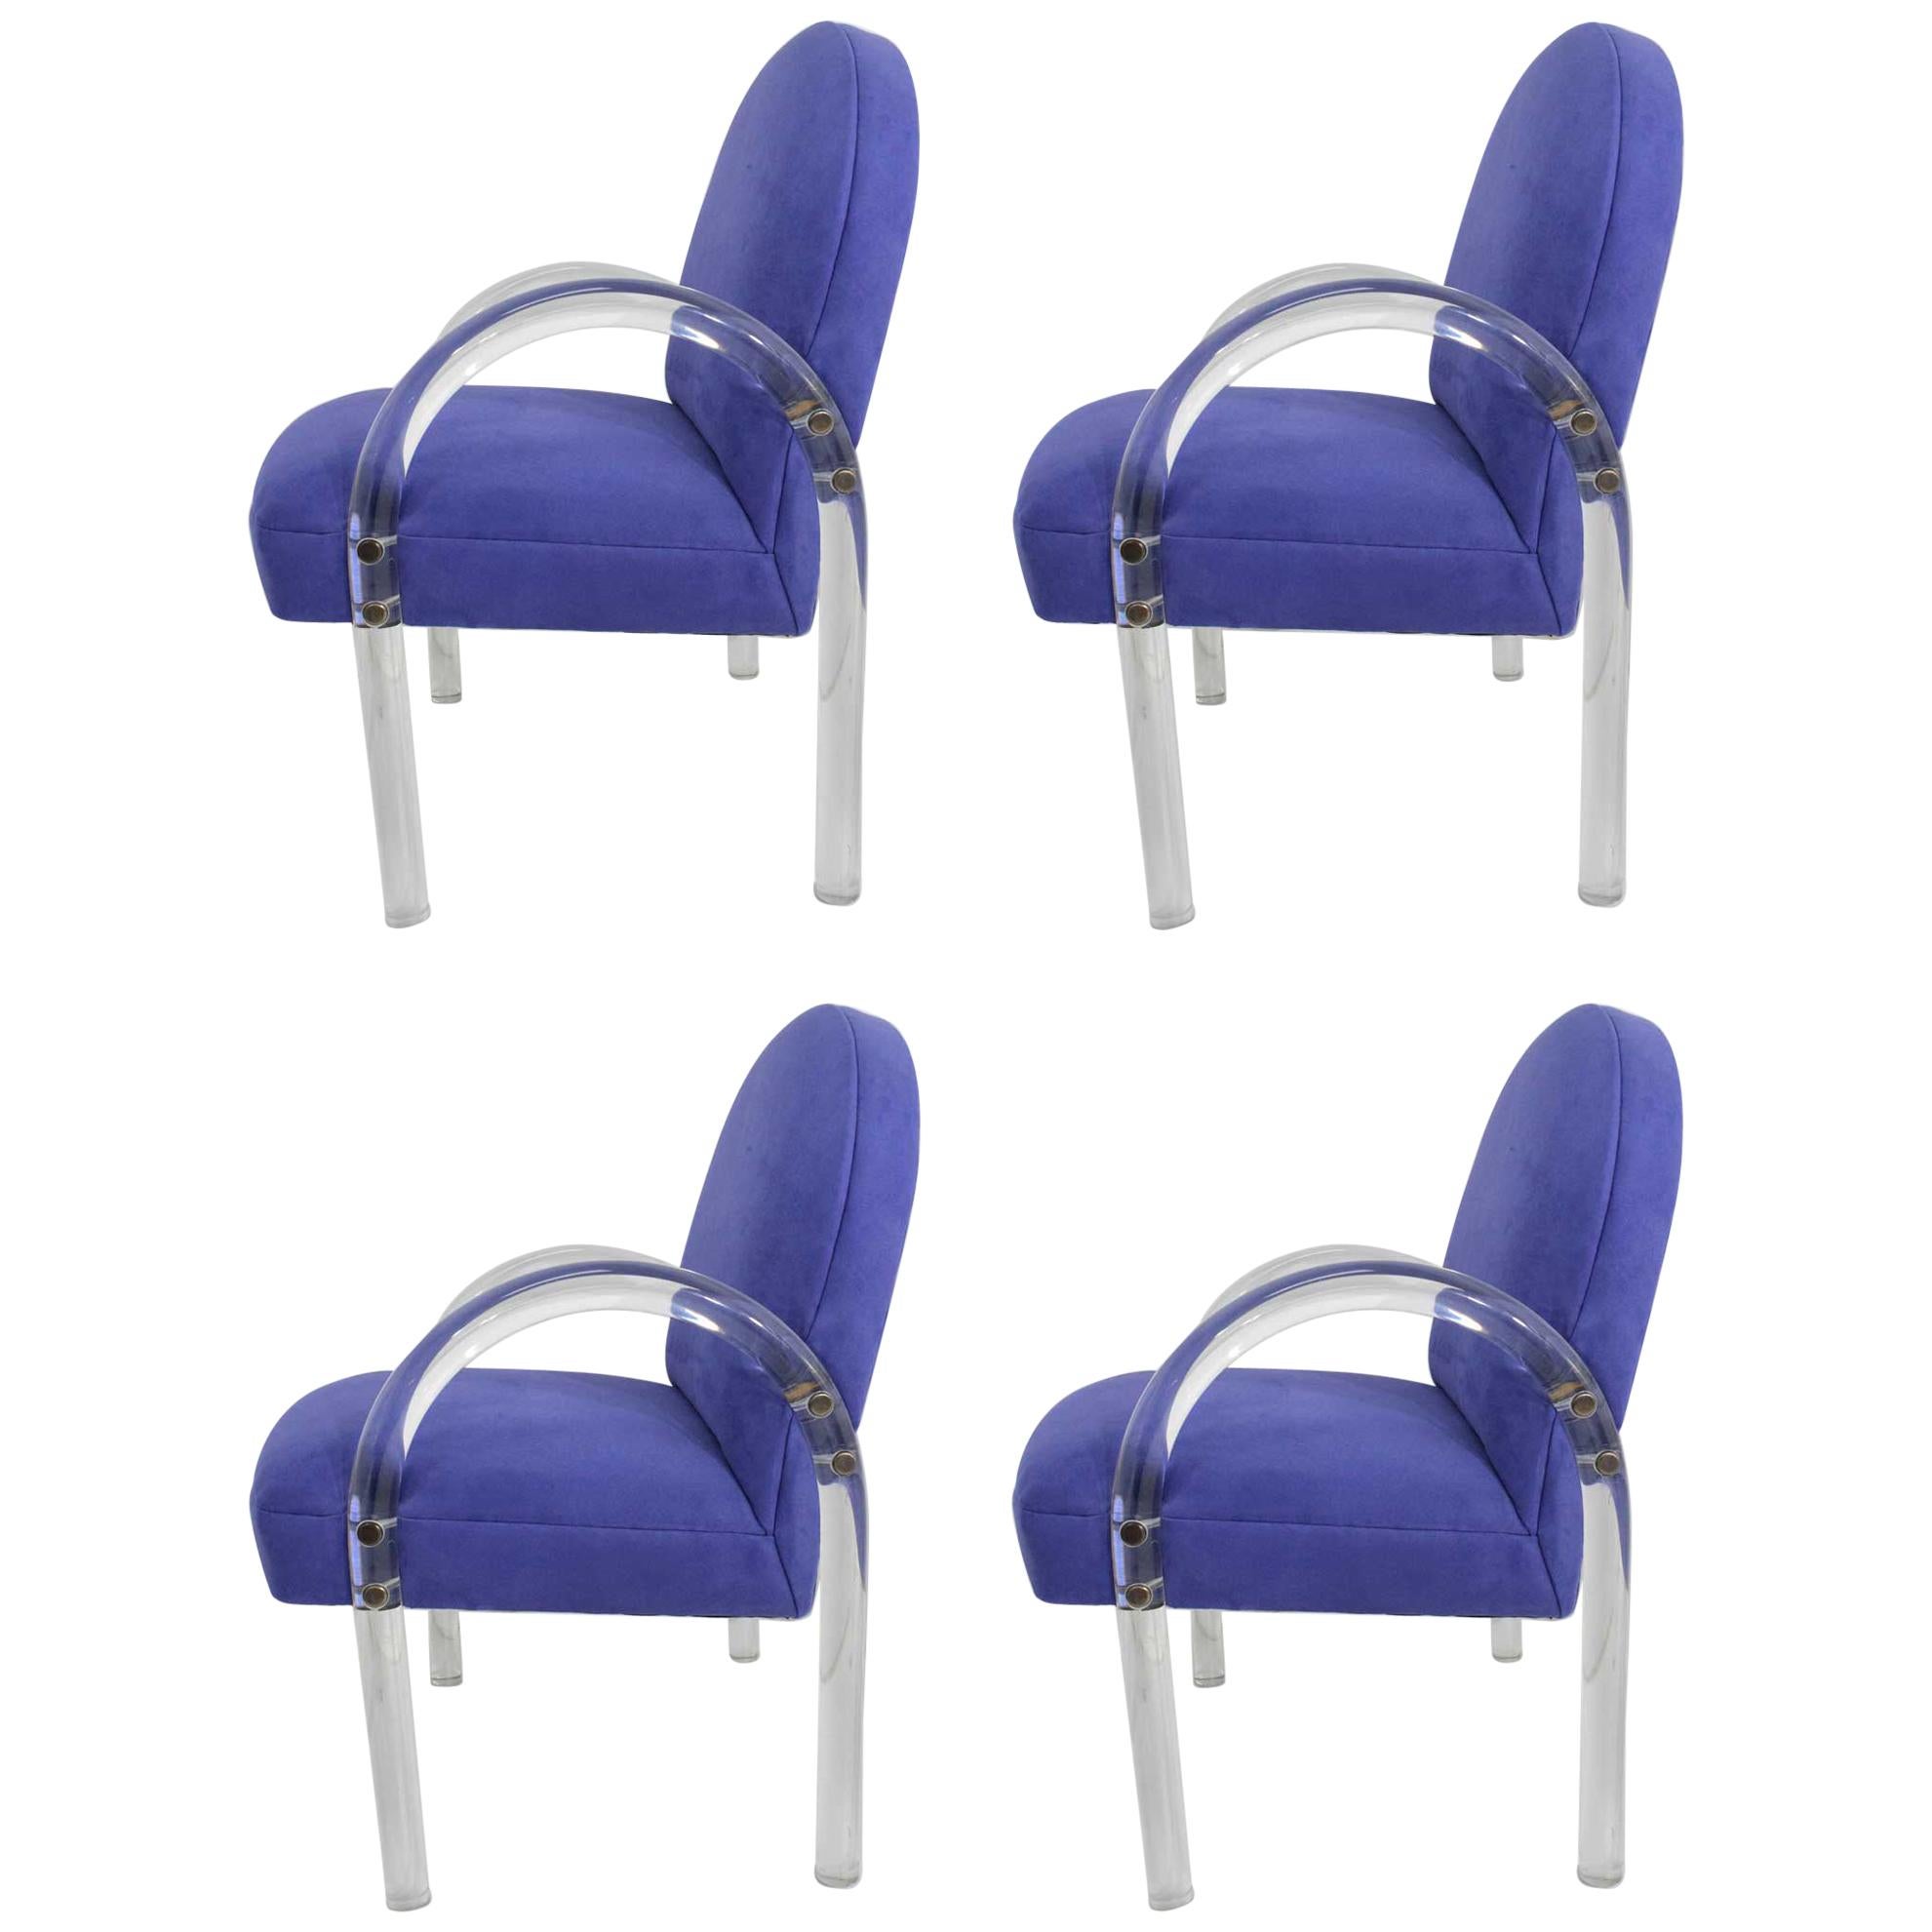 Pace Collection Waterfall Dining Chairs in Lavender - ONLY TWO AVAILABLE